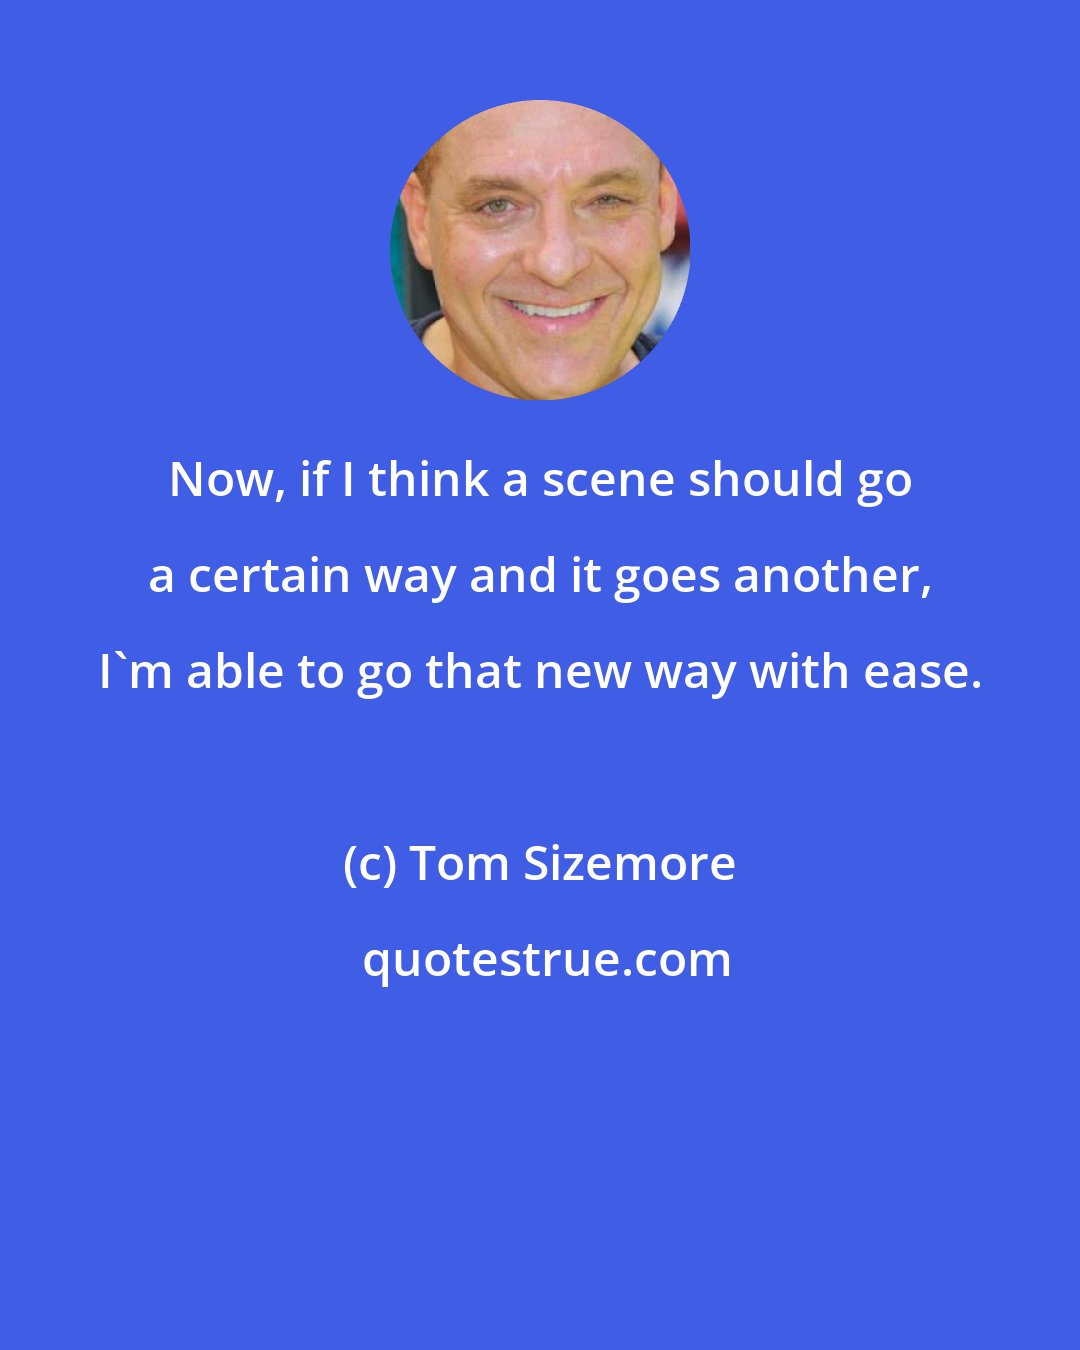 Tom Sizemore: Now, if I think a scene should go a certain way and it goes another, I'm able to go that new way with ease.